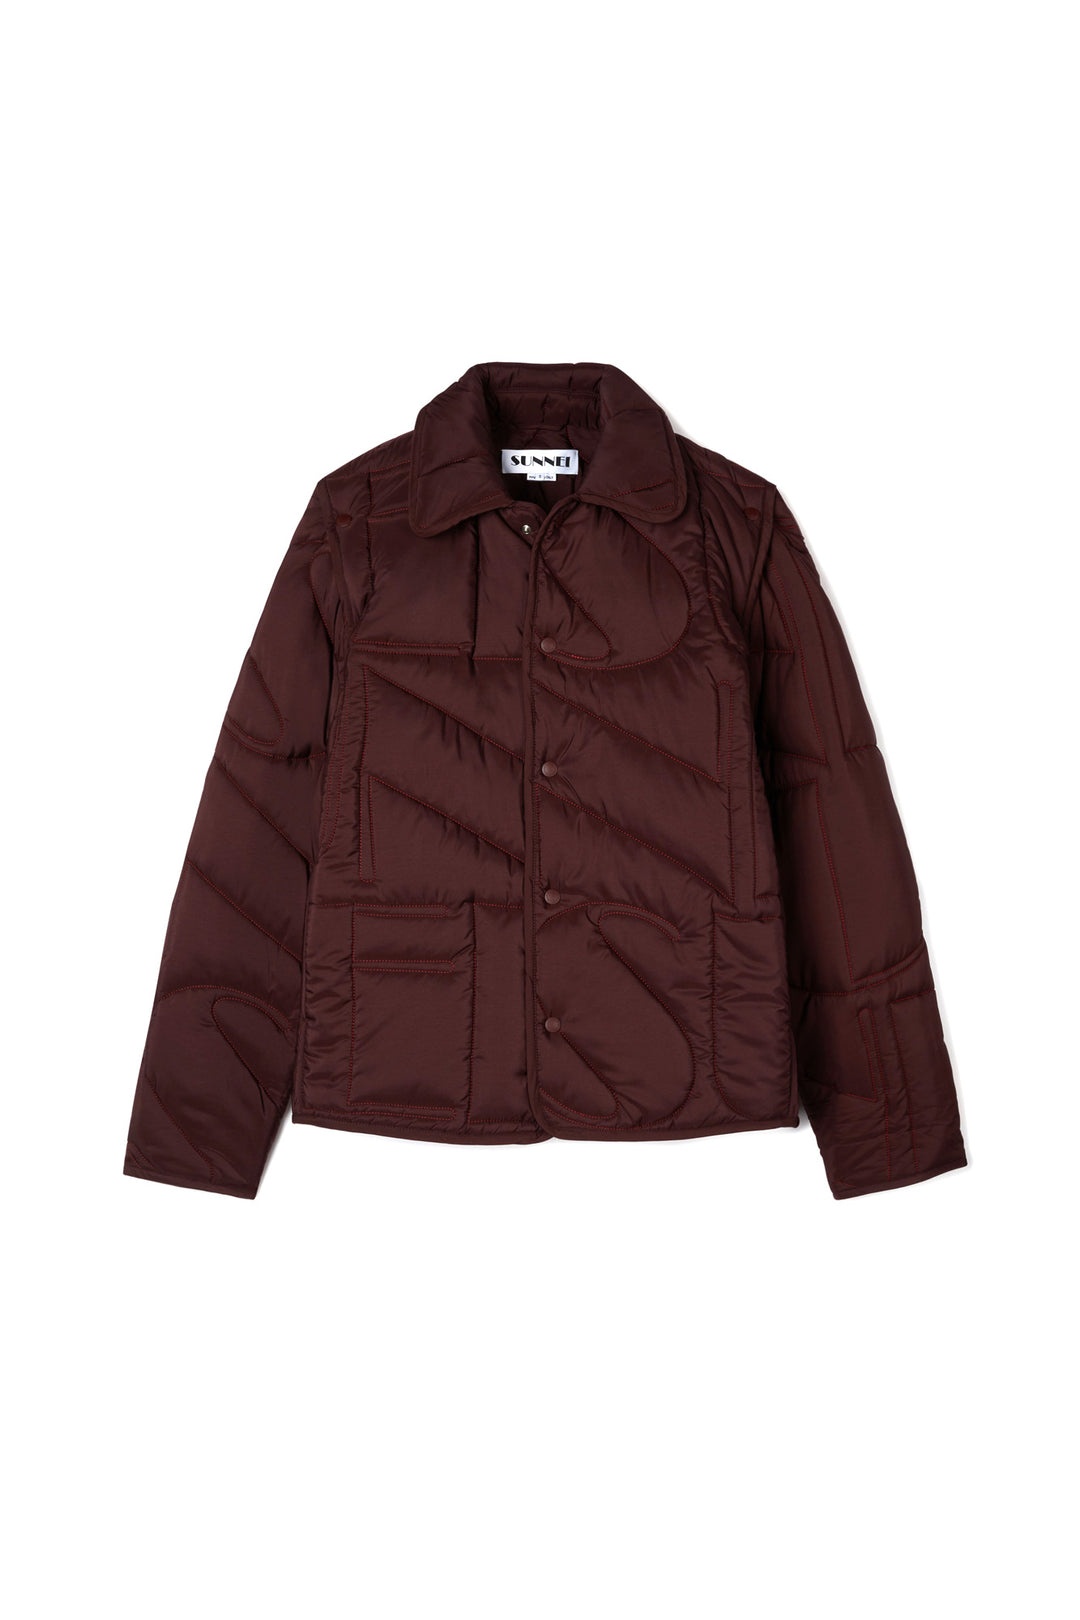 PADDED JACKET / maroon / embroidered allover logo - 1